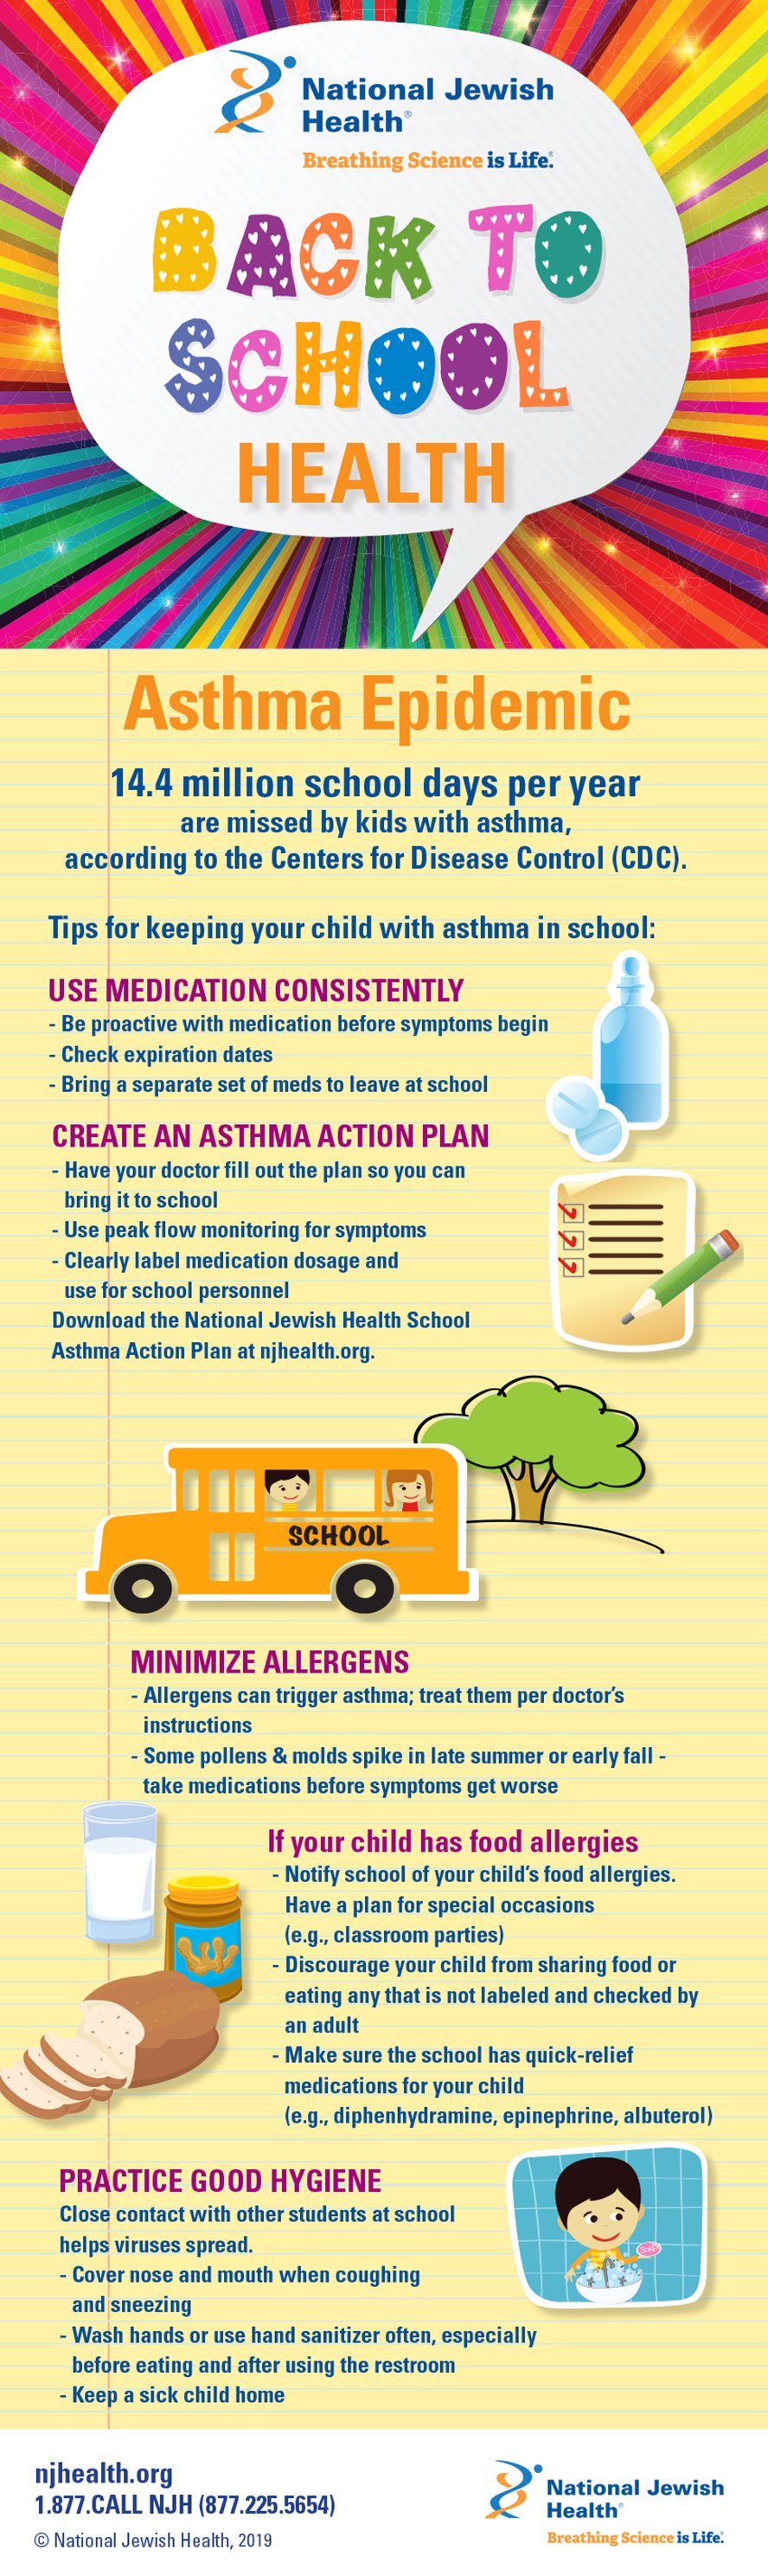 Asthma Epidemic infographic